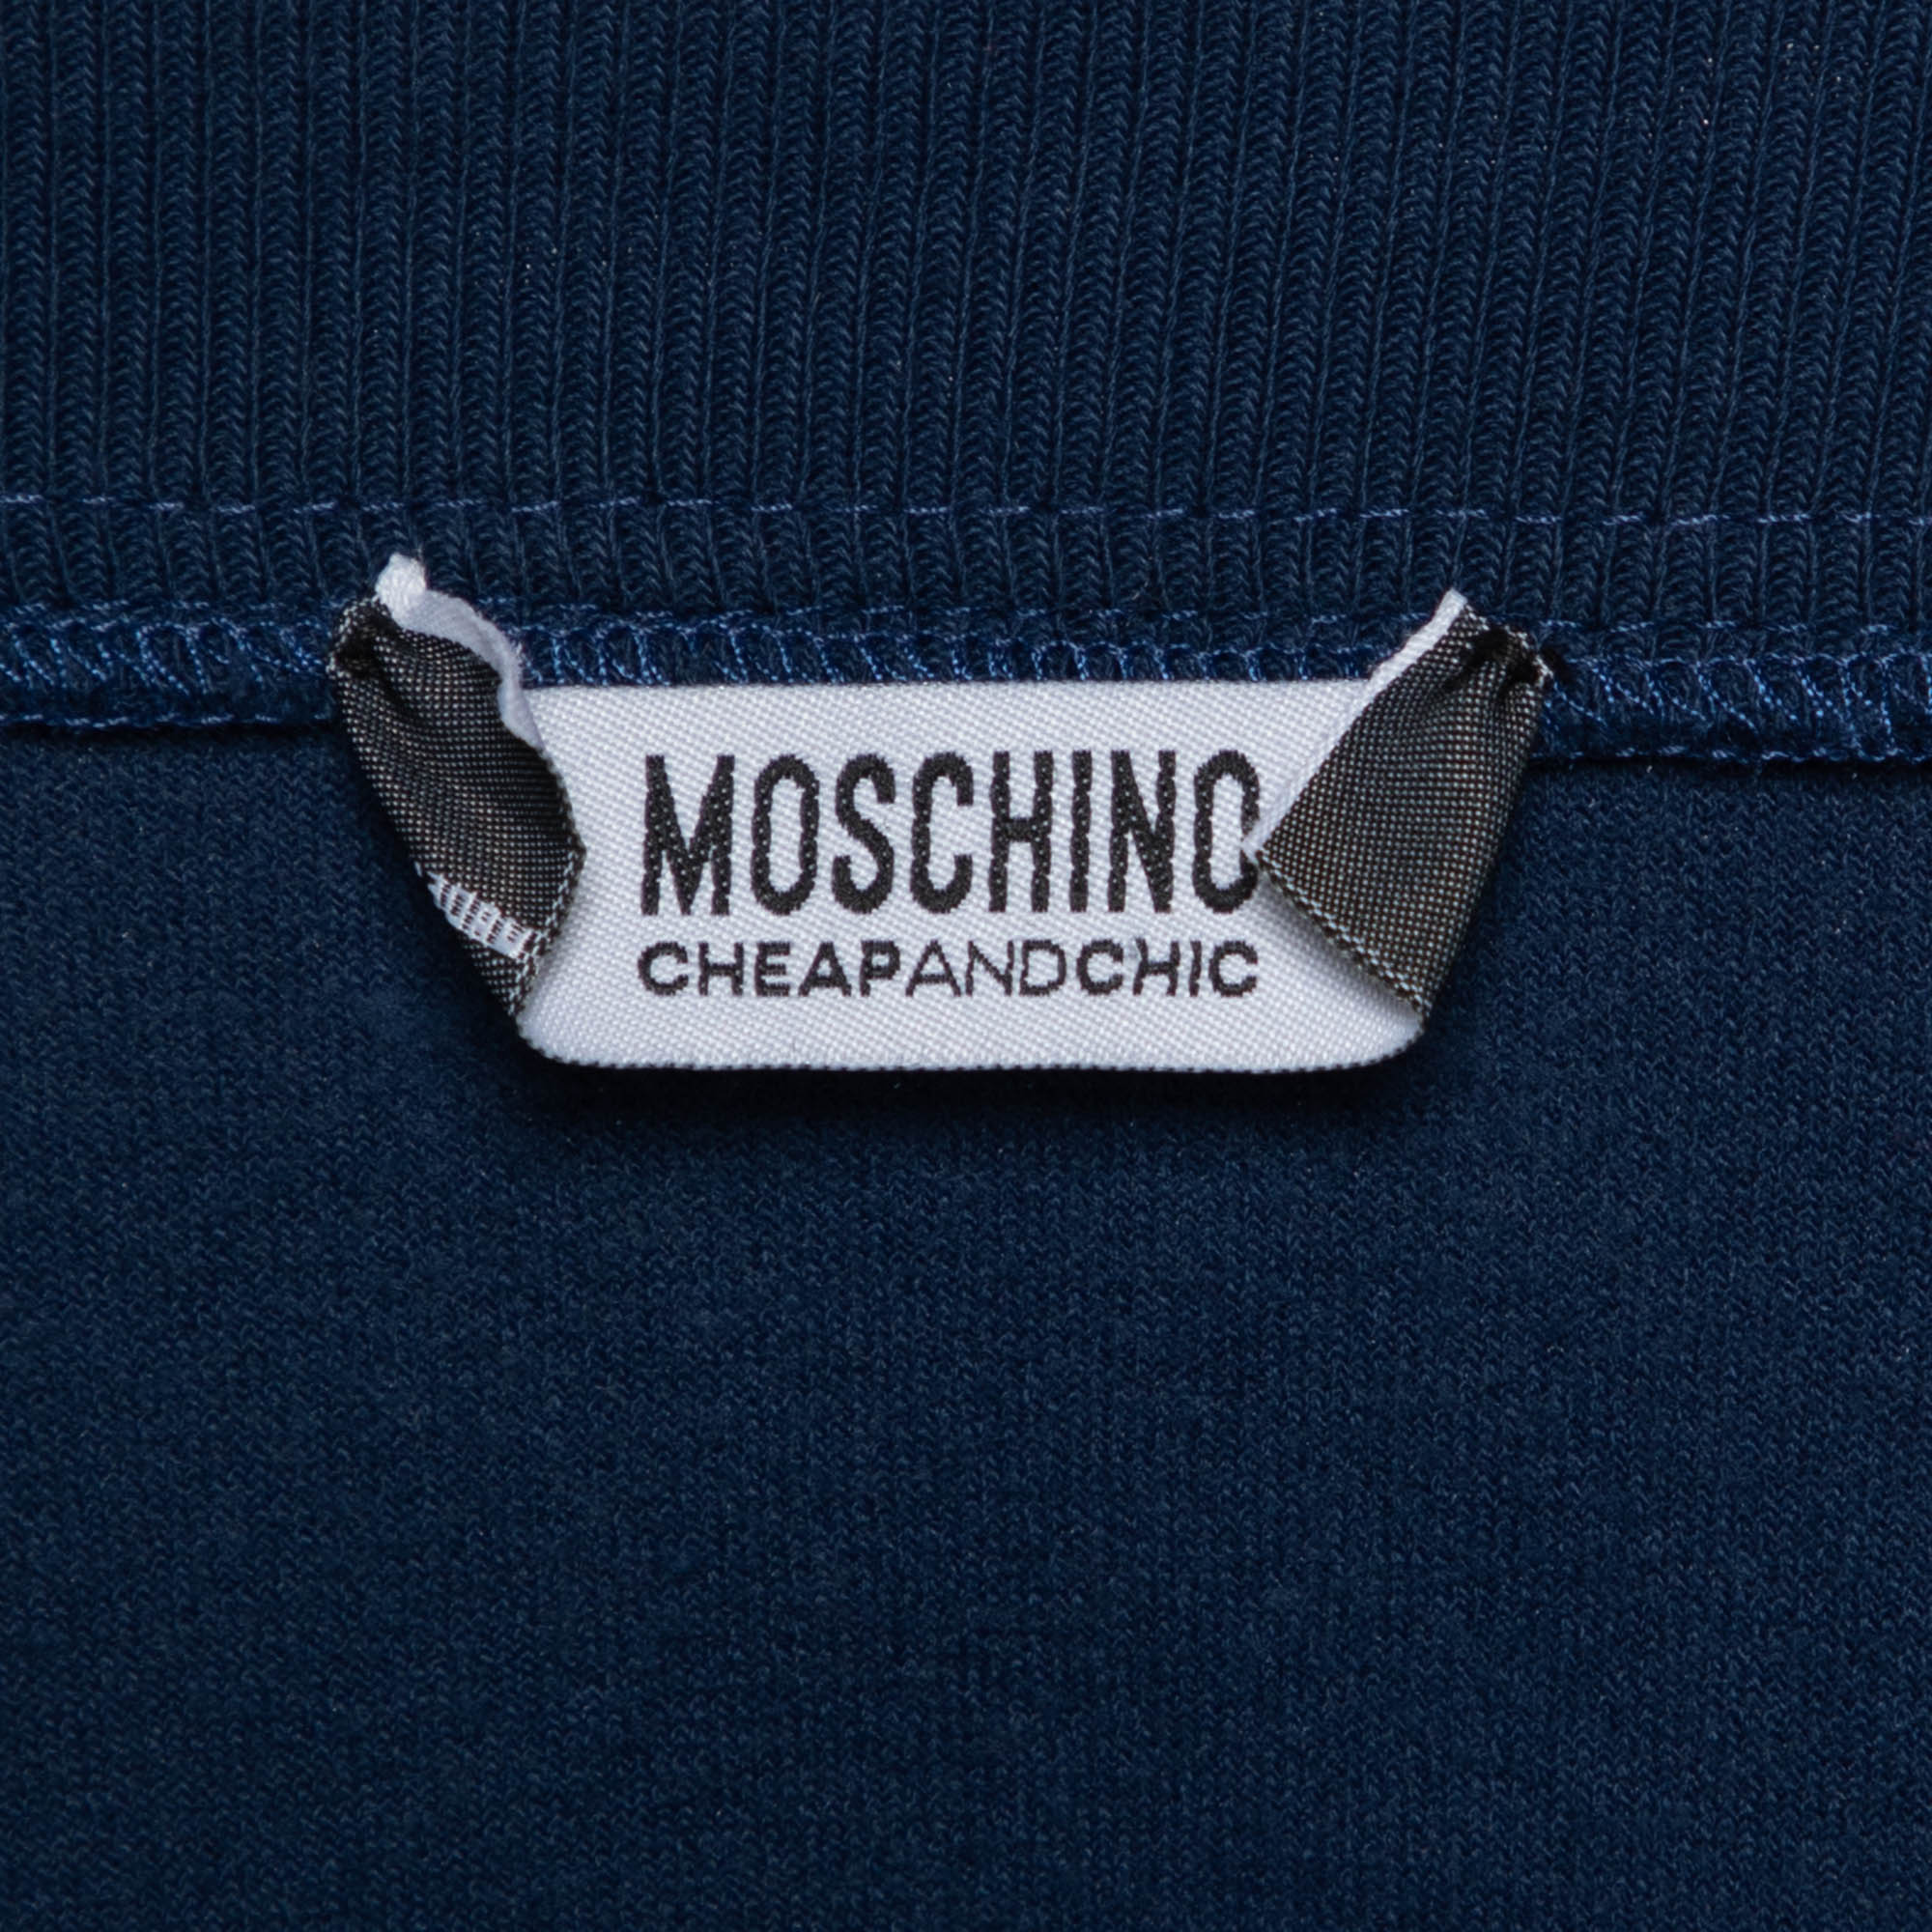 Moschino Cheap And Chic Navy Blue Velvet Zip Front Jacket M